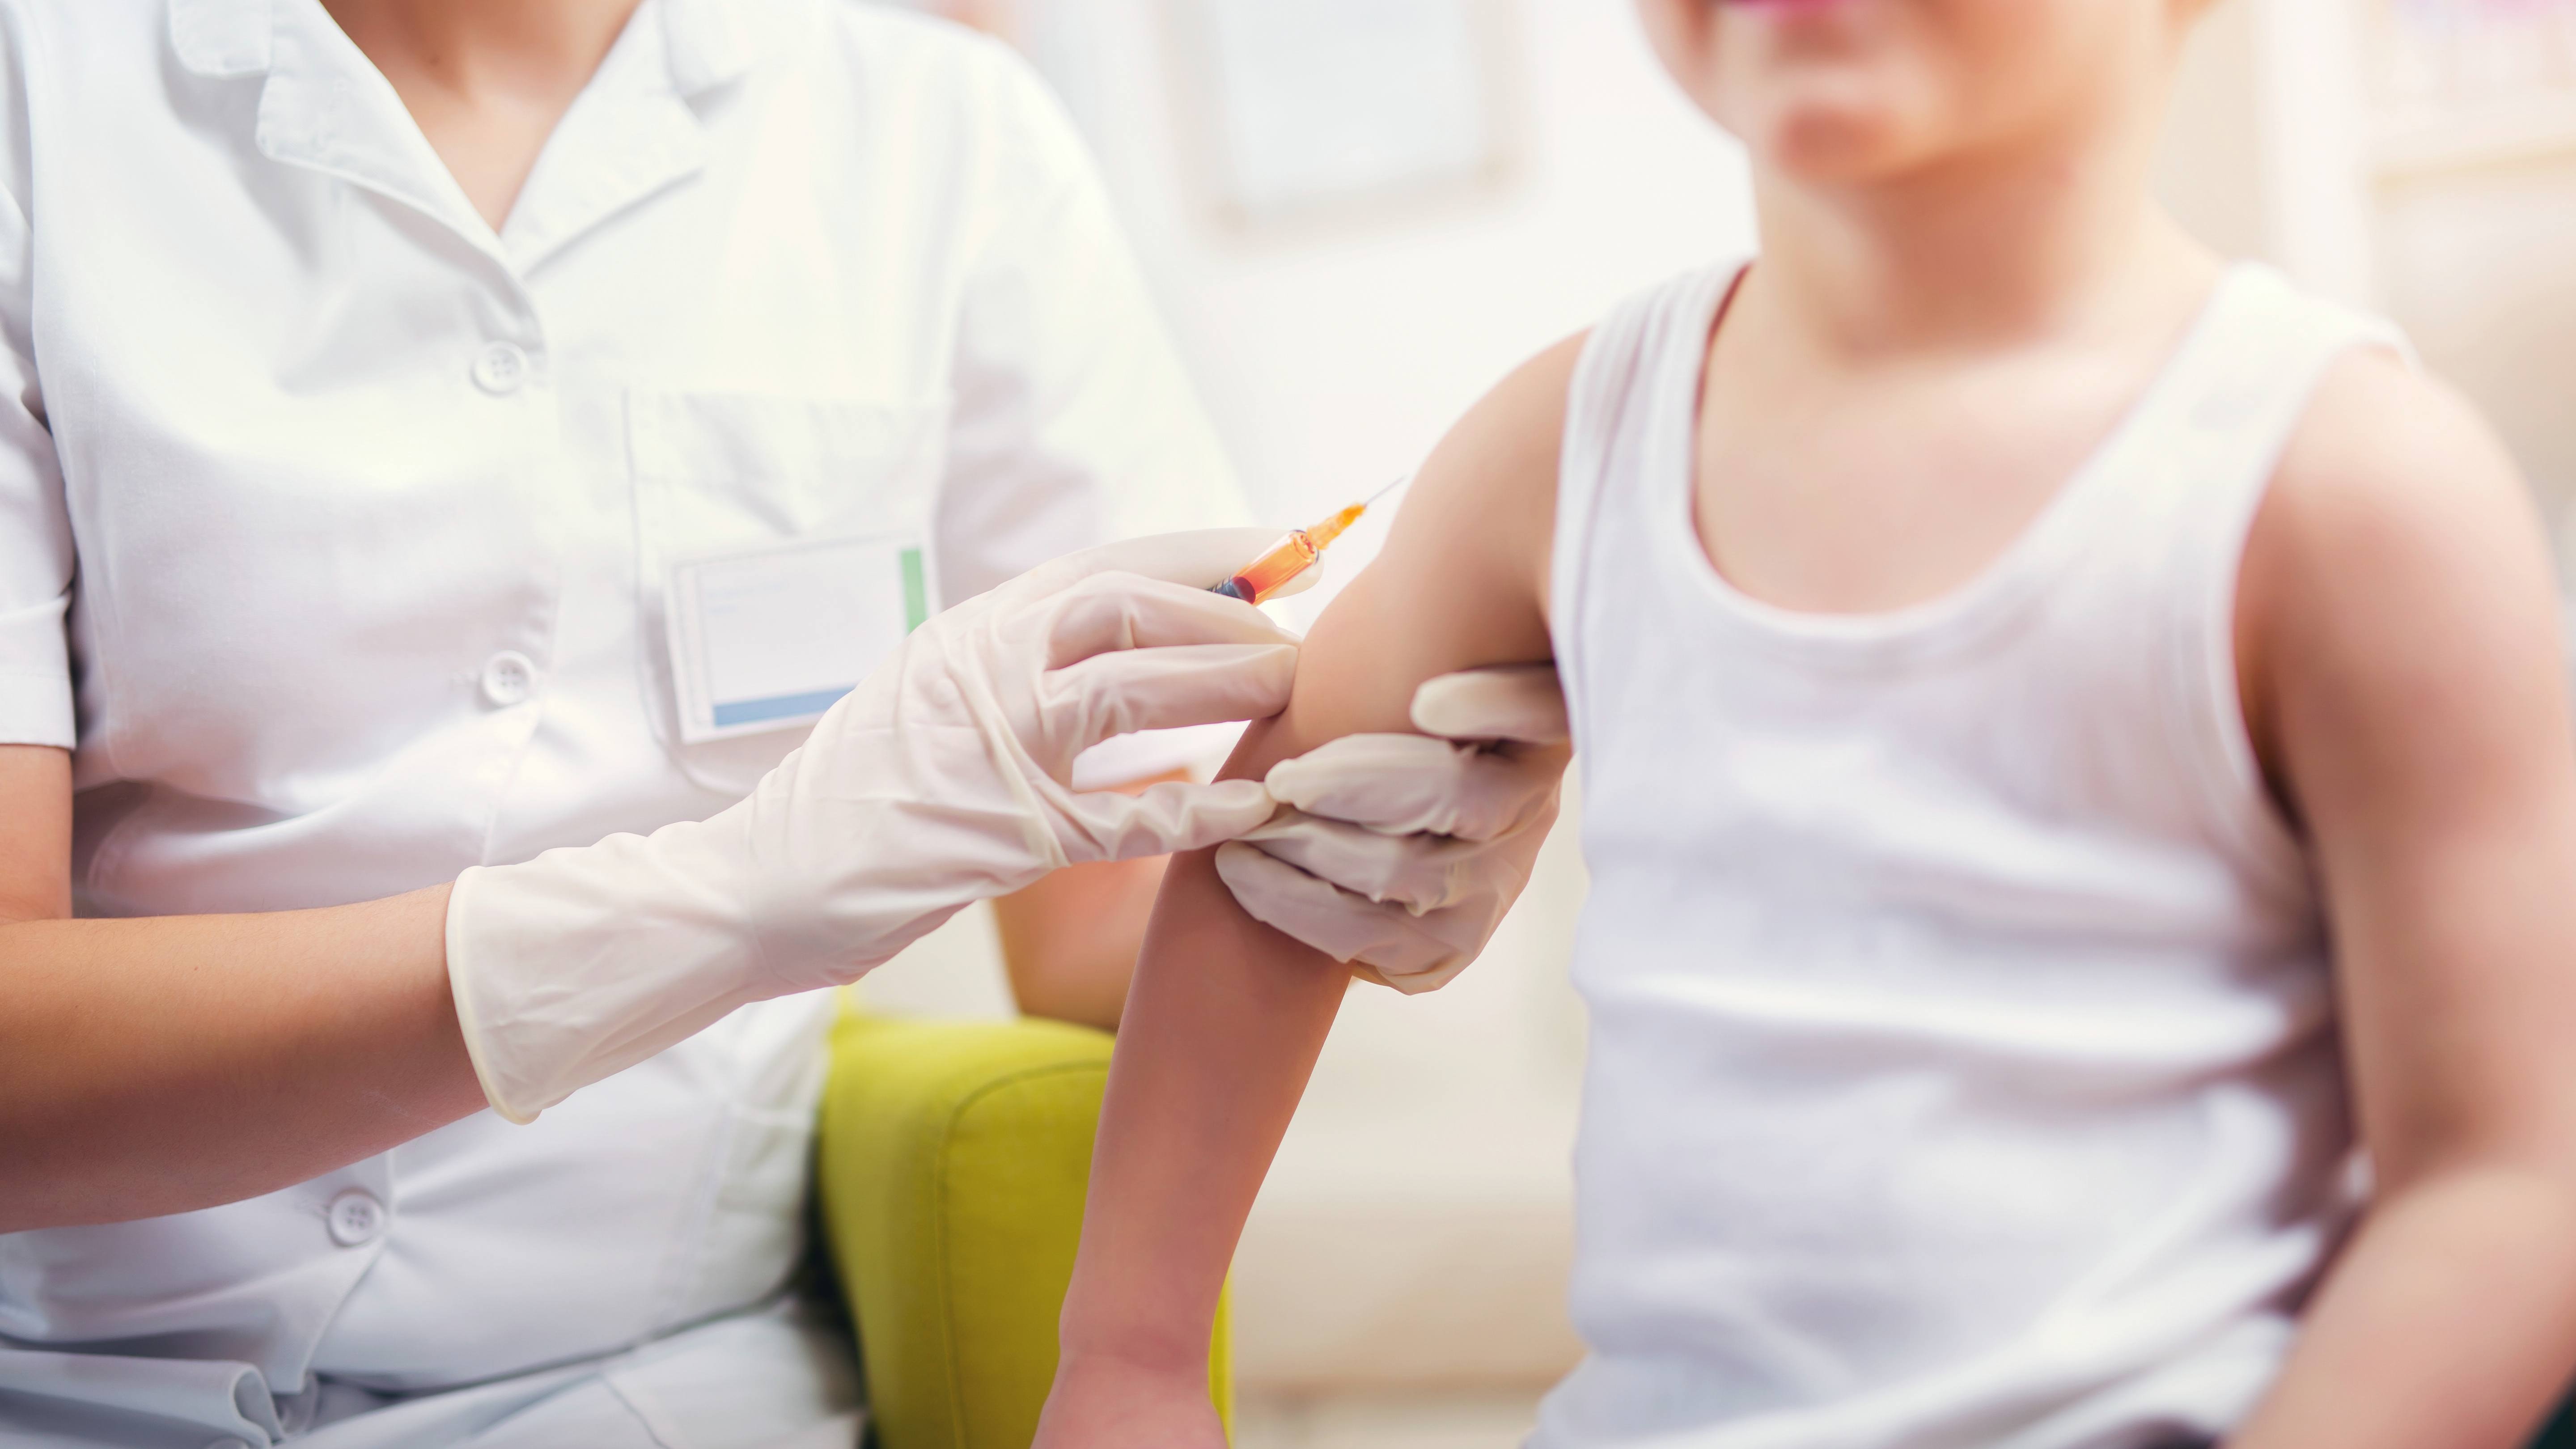 a young child in a t-shirt getting a vaccination, flu shot